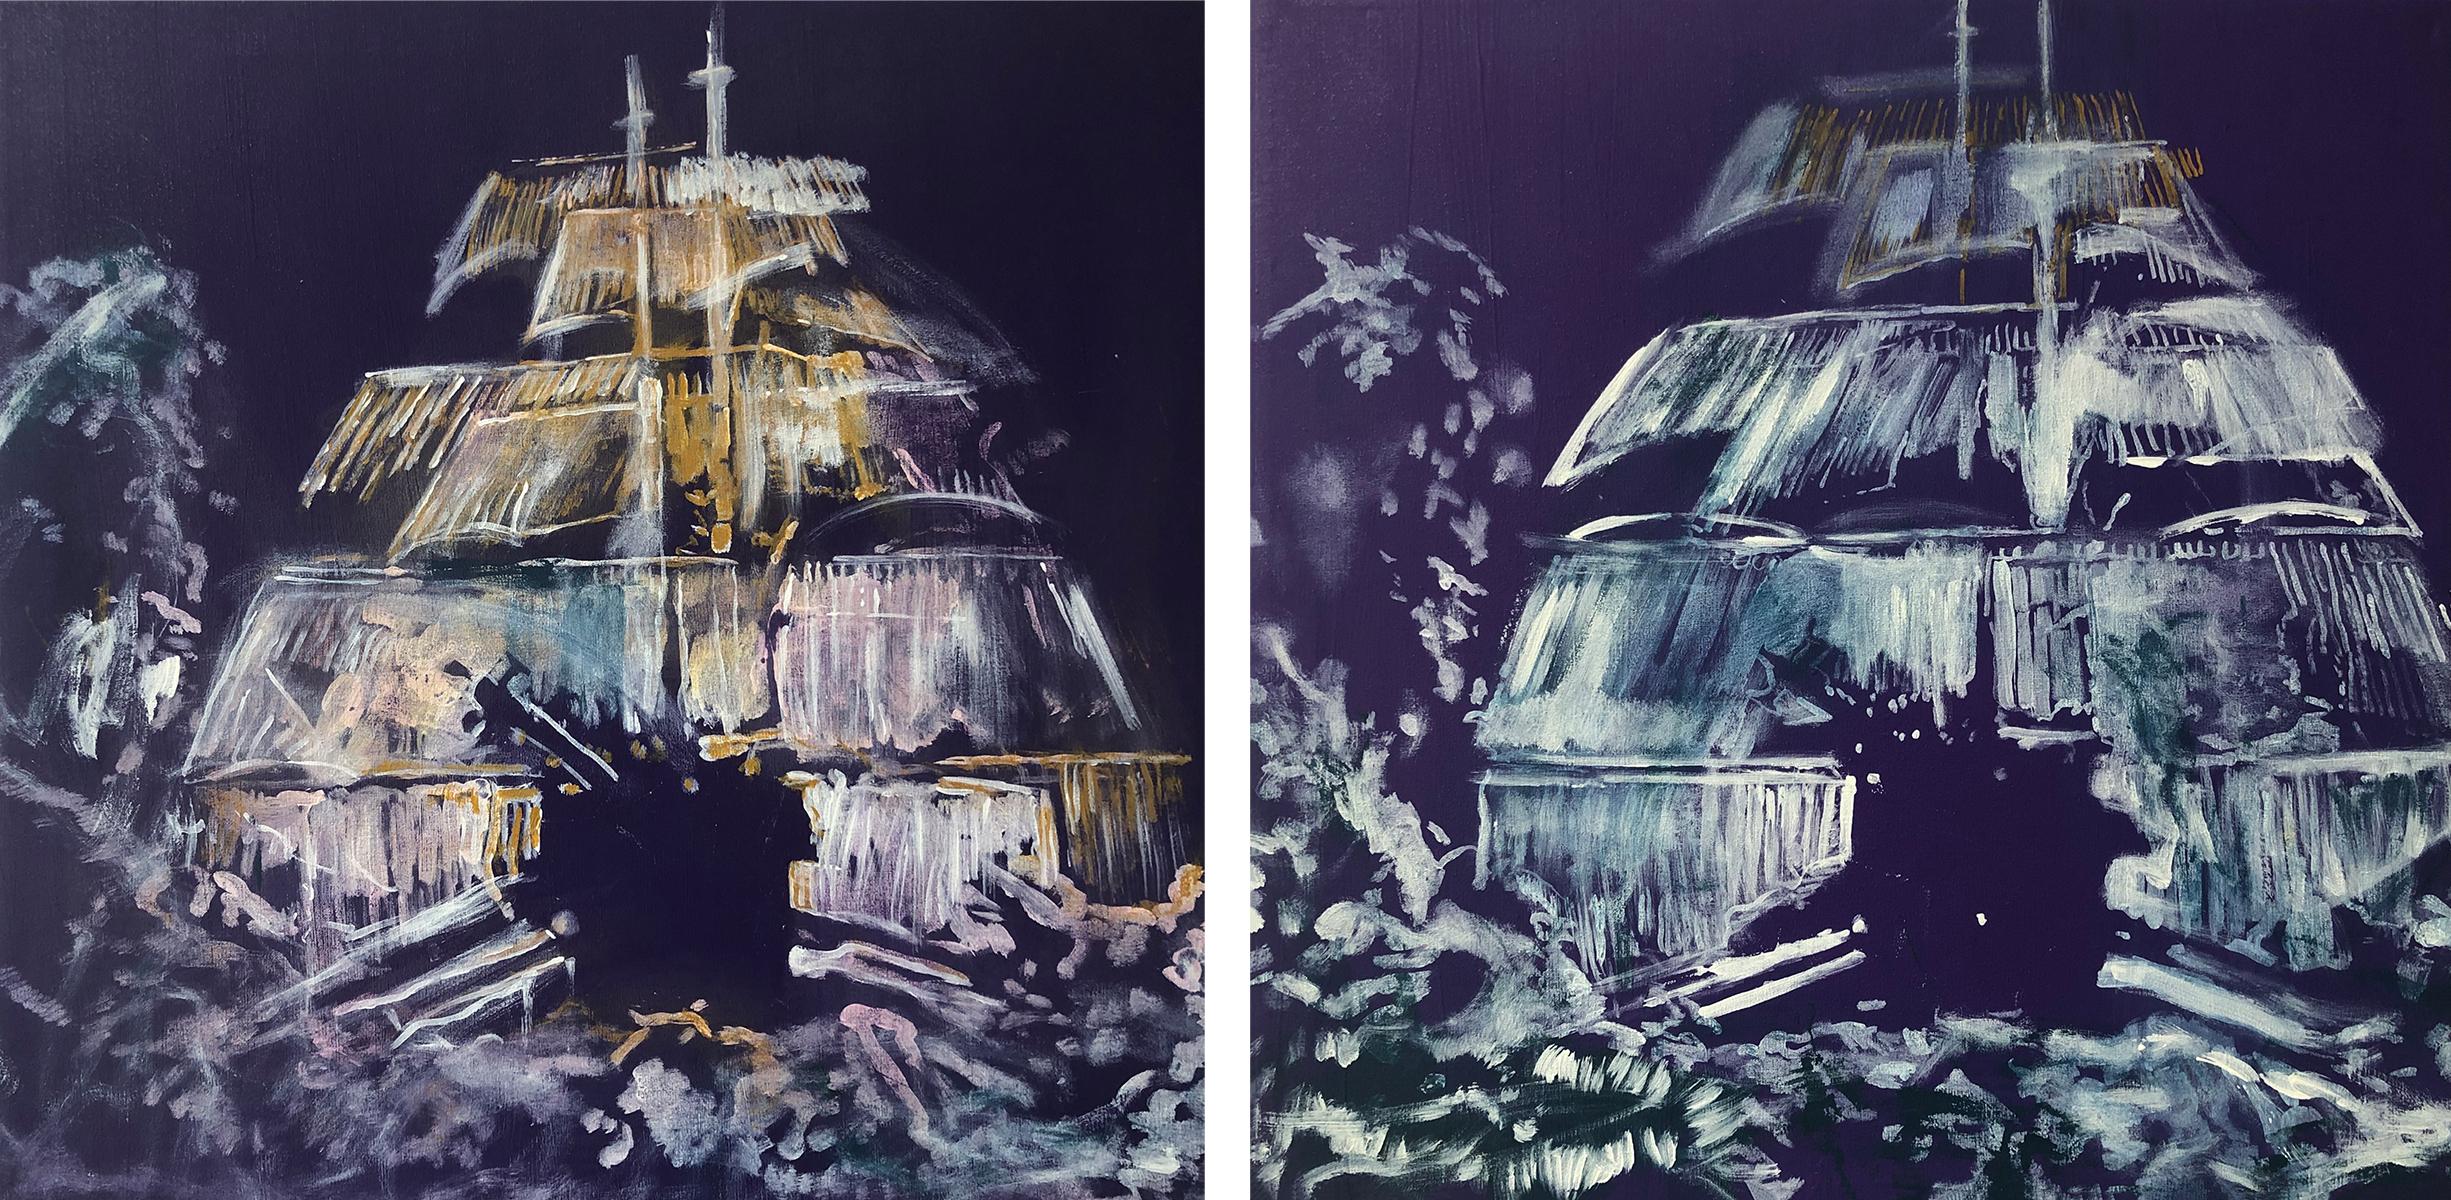 Sergio Bazan Landscape Painting - Barcos Violeta II & III, Diptych . Mix media painting on Canvas